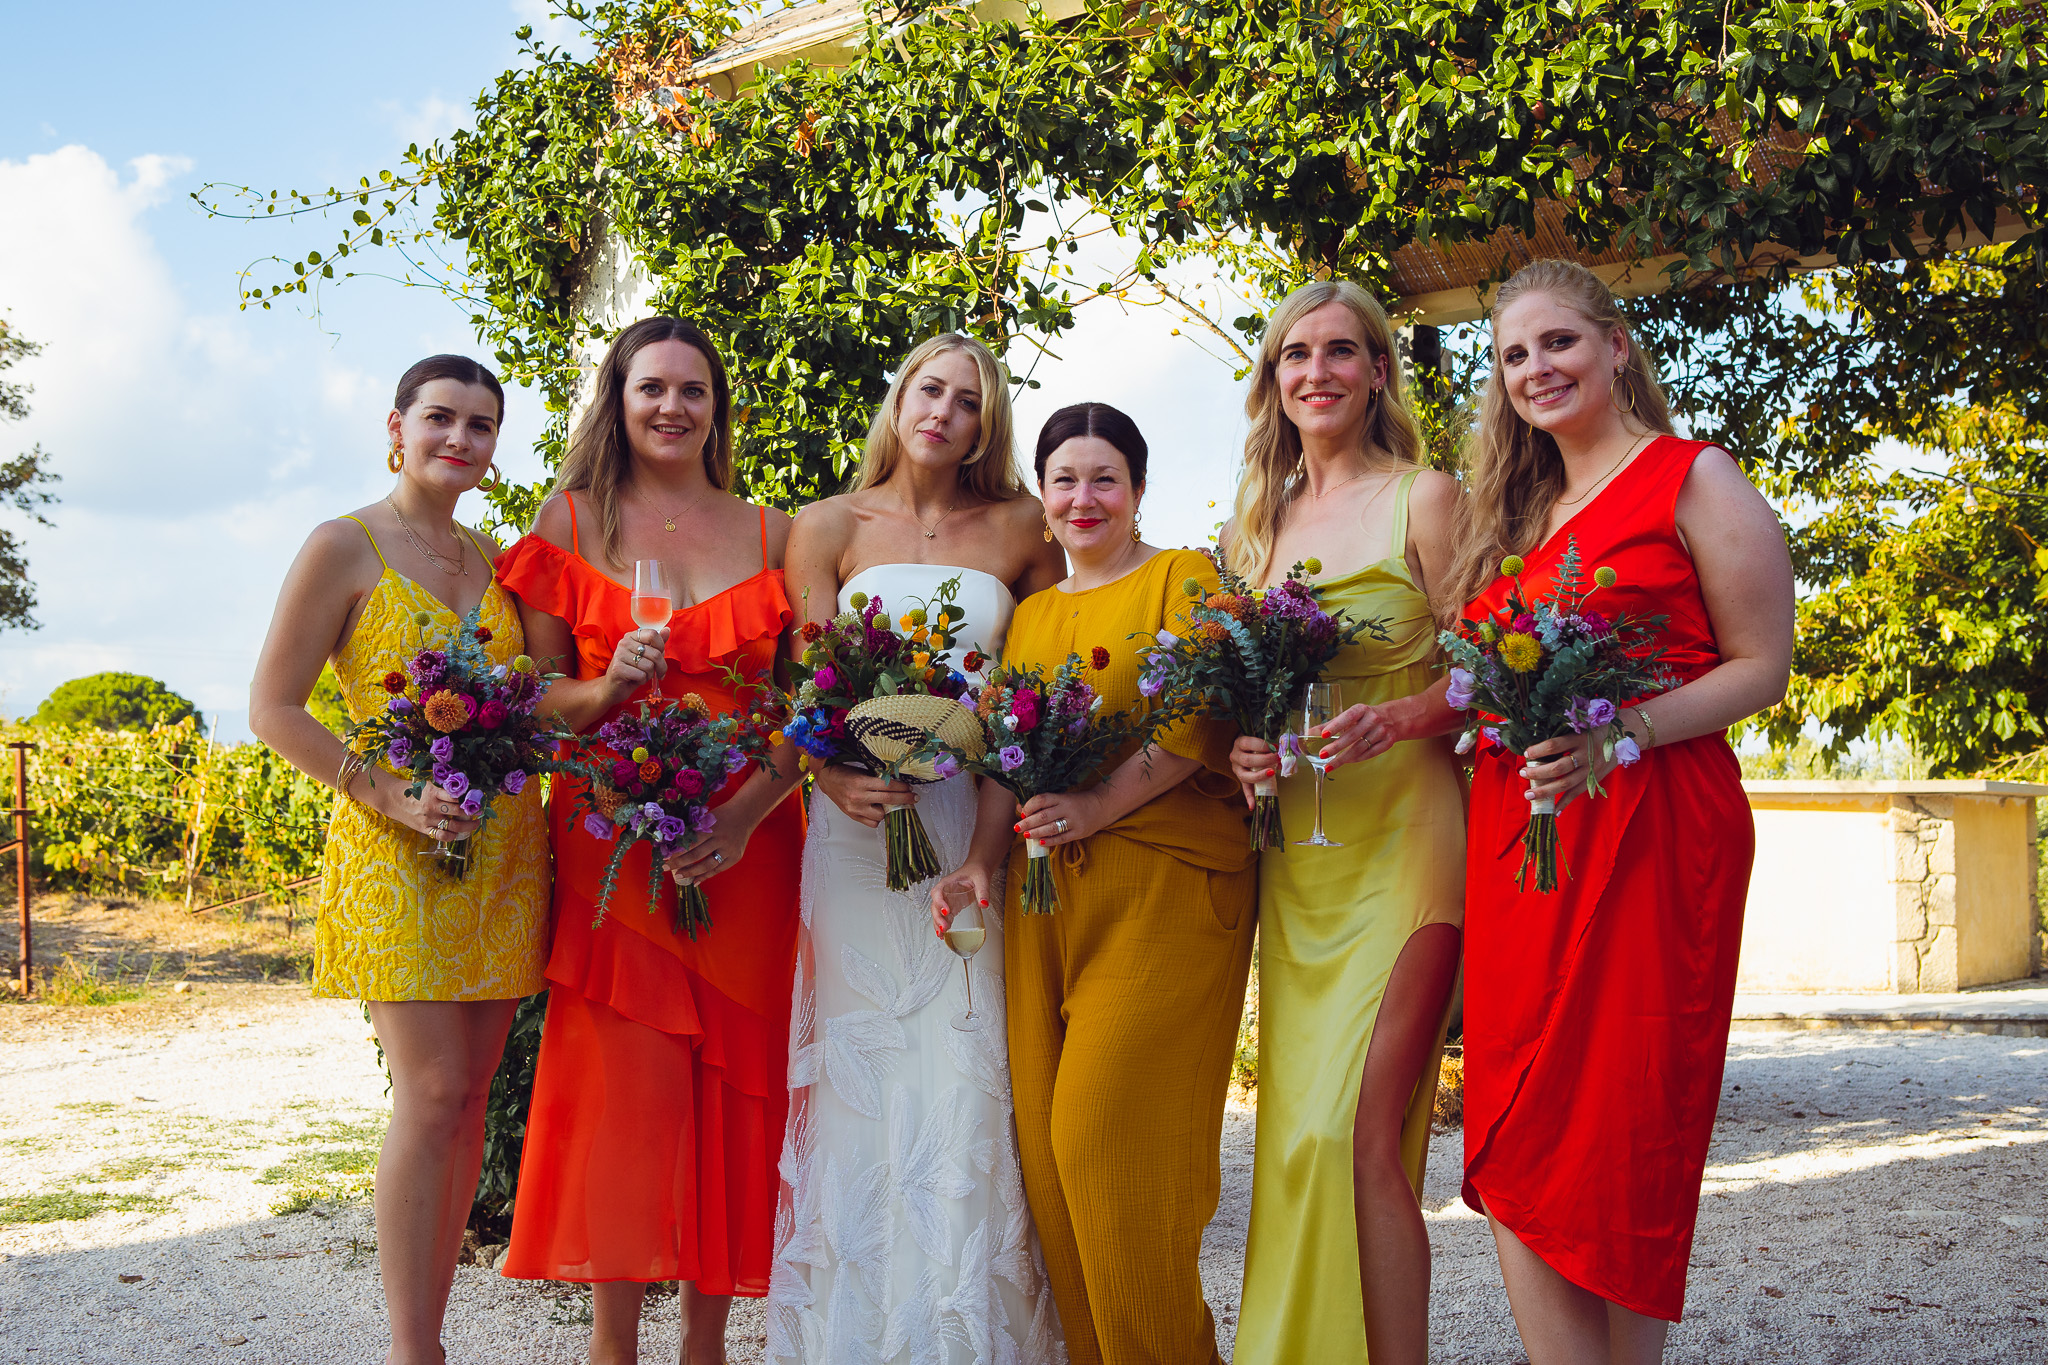 The bride and five brightly dressed bridesmaids stand together and pose for a group shot